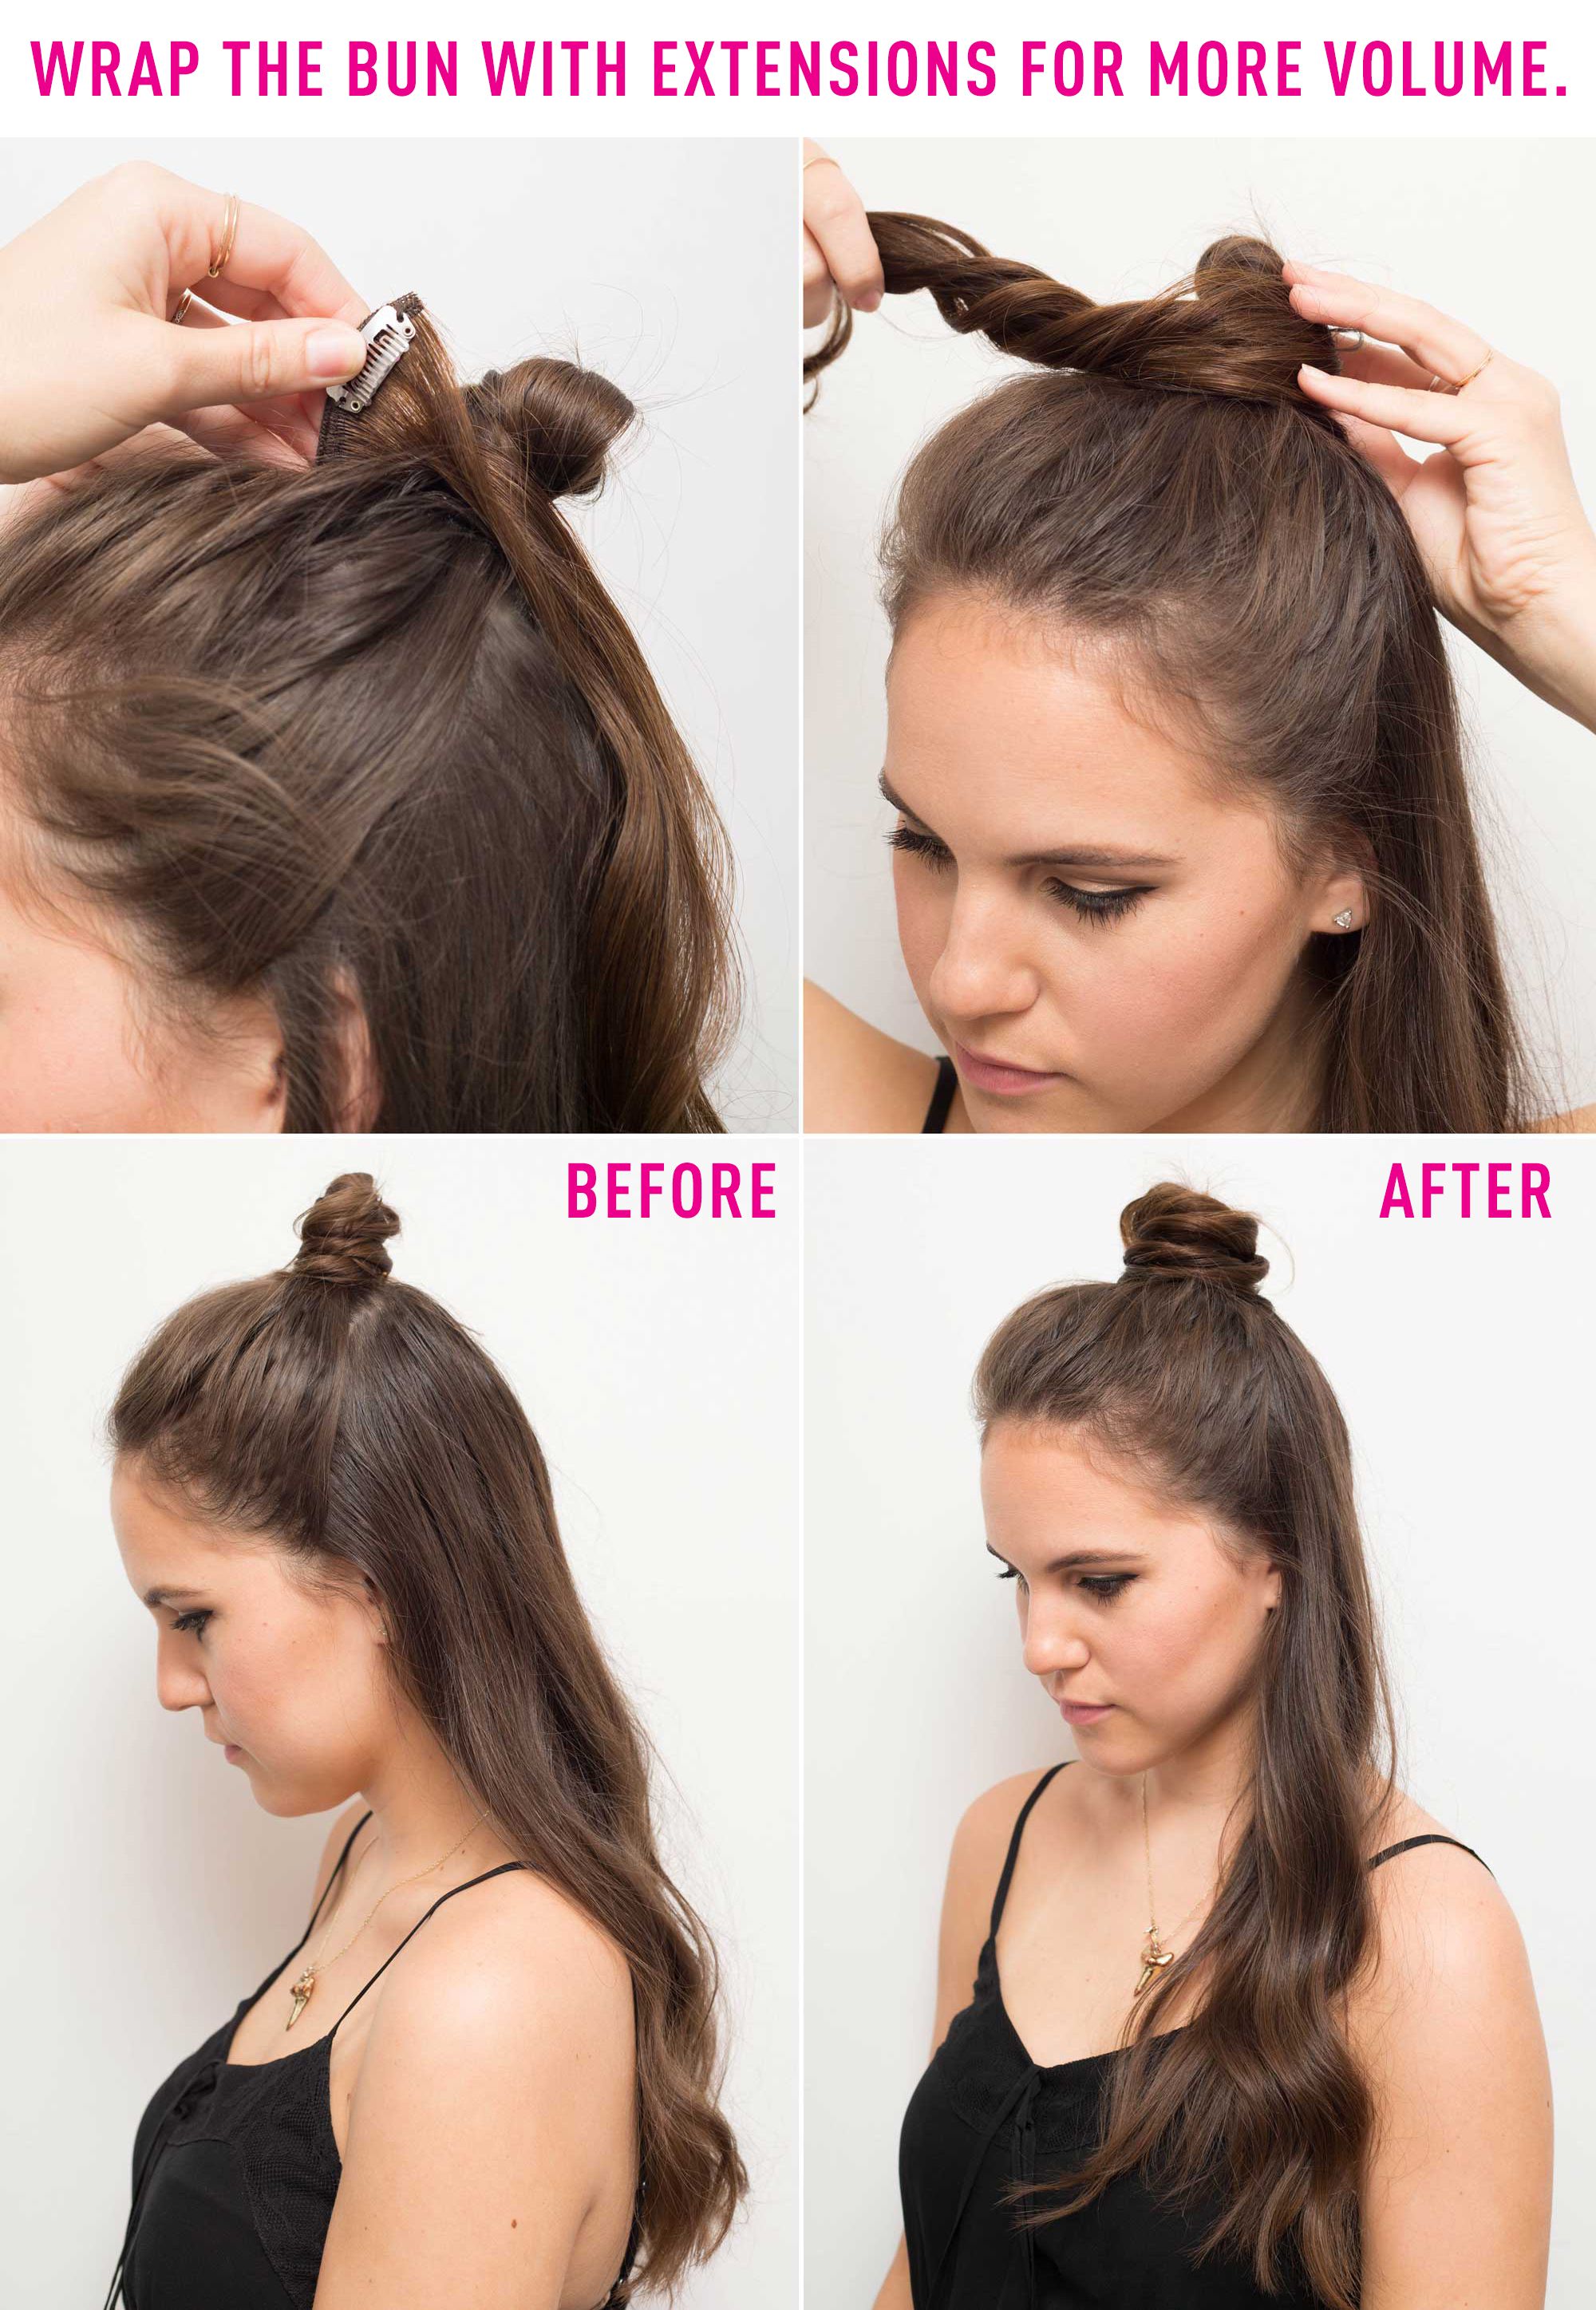 5 Ways to Rock Wet Hair to Work | The Muse